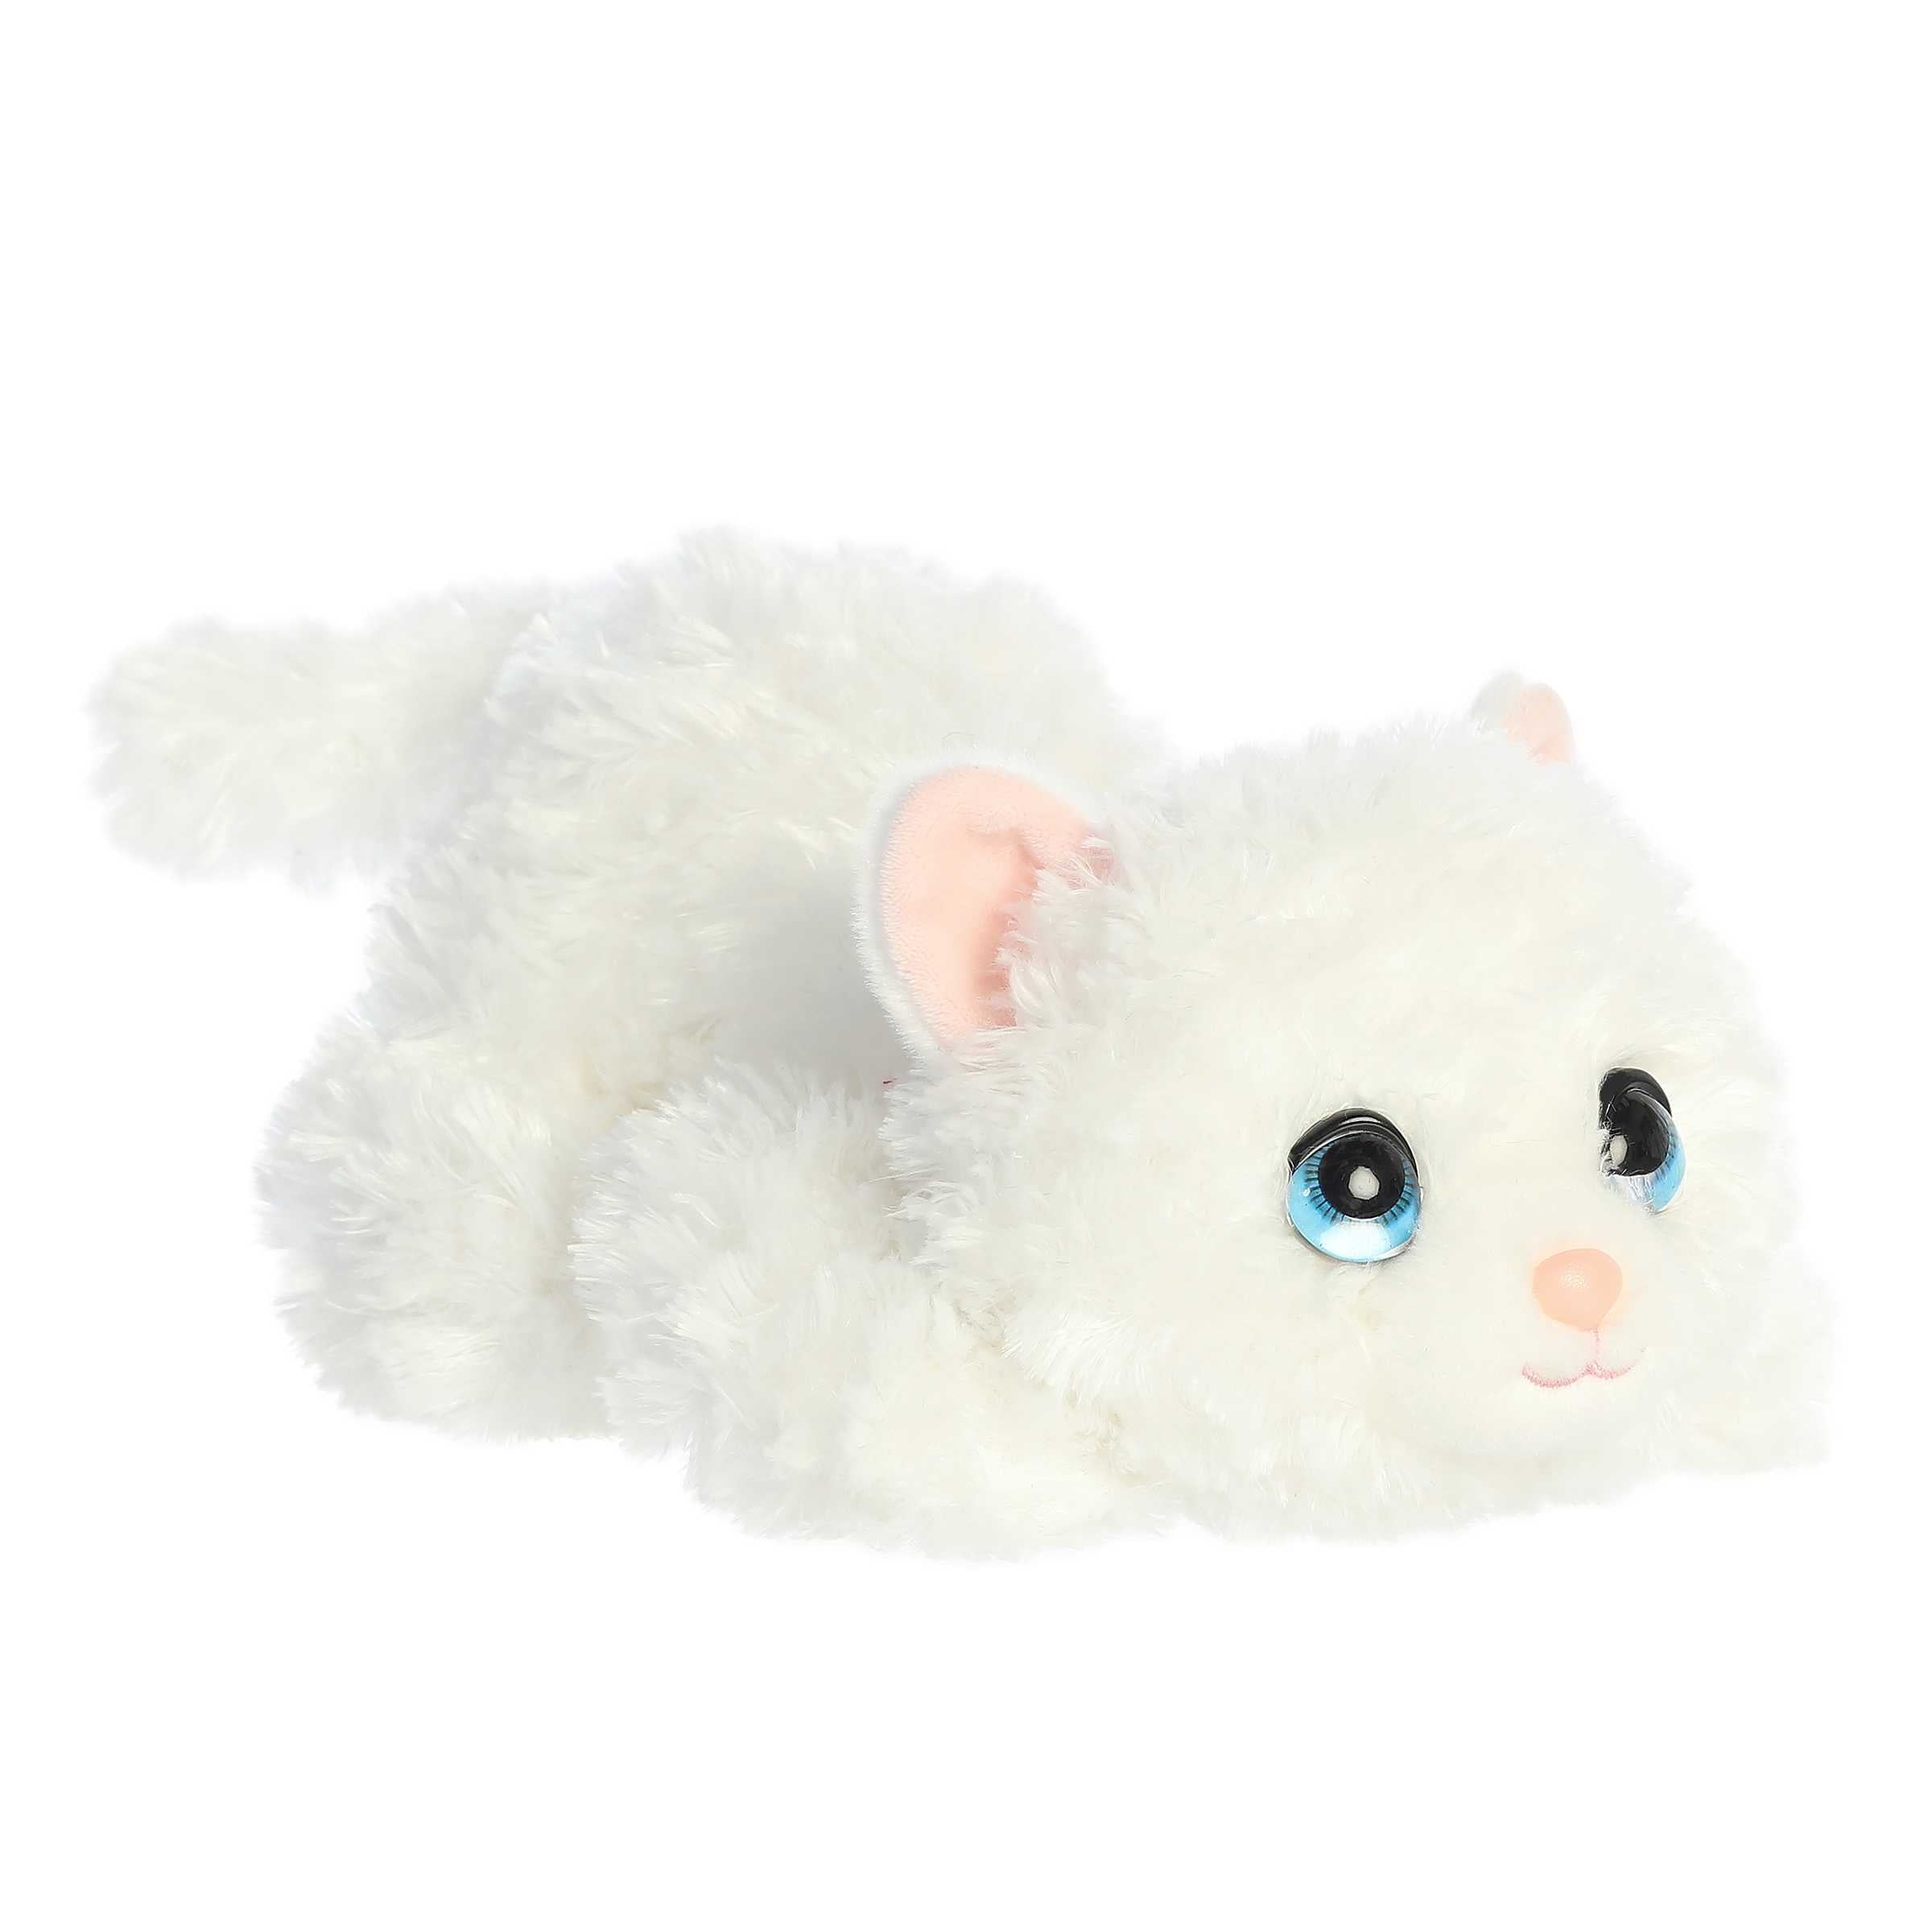 Soft white stuffed Angora kitten plush with affectionate blue eyes in a playful, ready-to-pounce position.